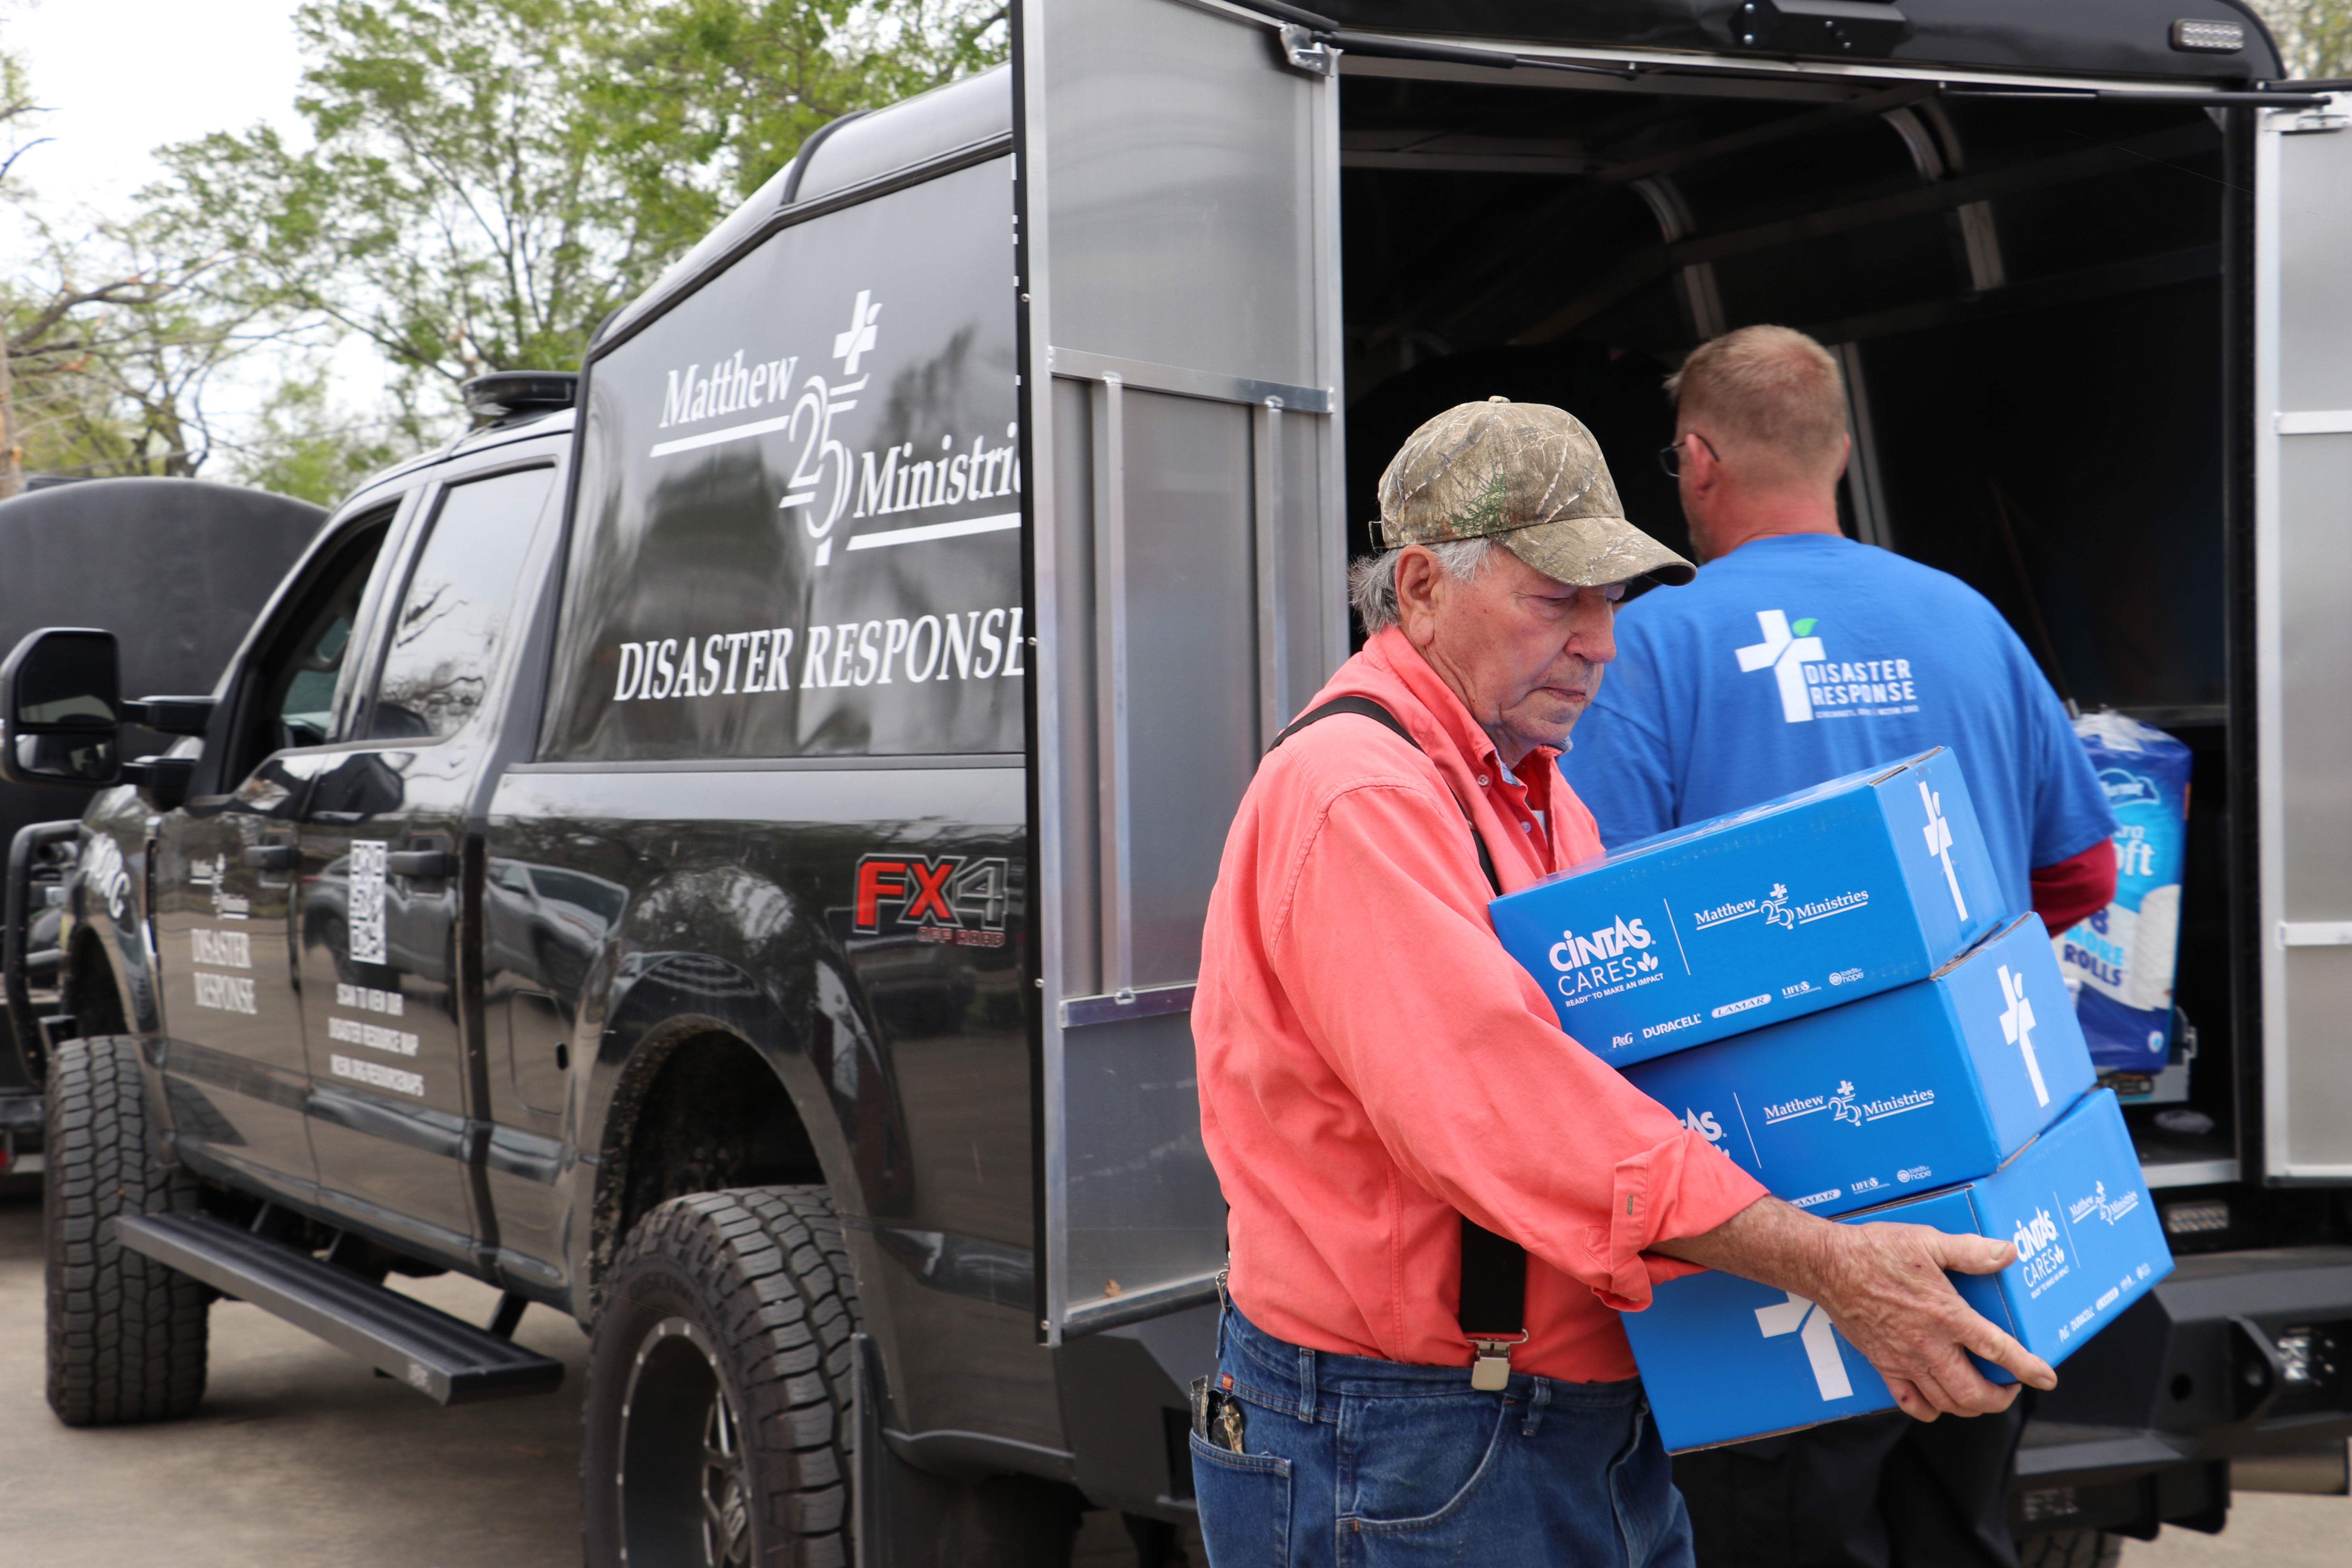 Matthew 25: Ministries relies on donations from companies and residents to fund their relief operations. (Photo courtesy of Matthew 25: Ministries)